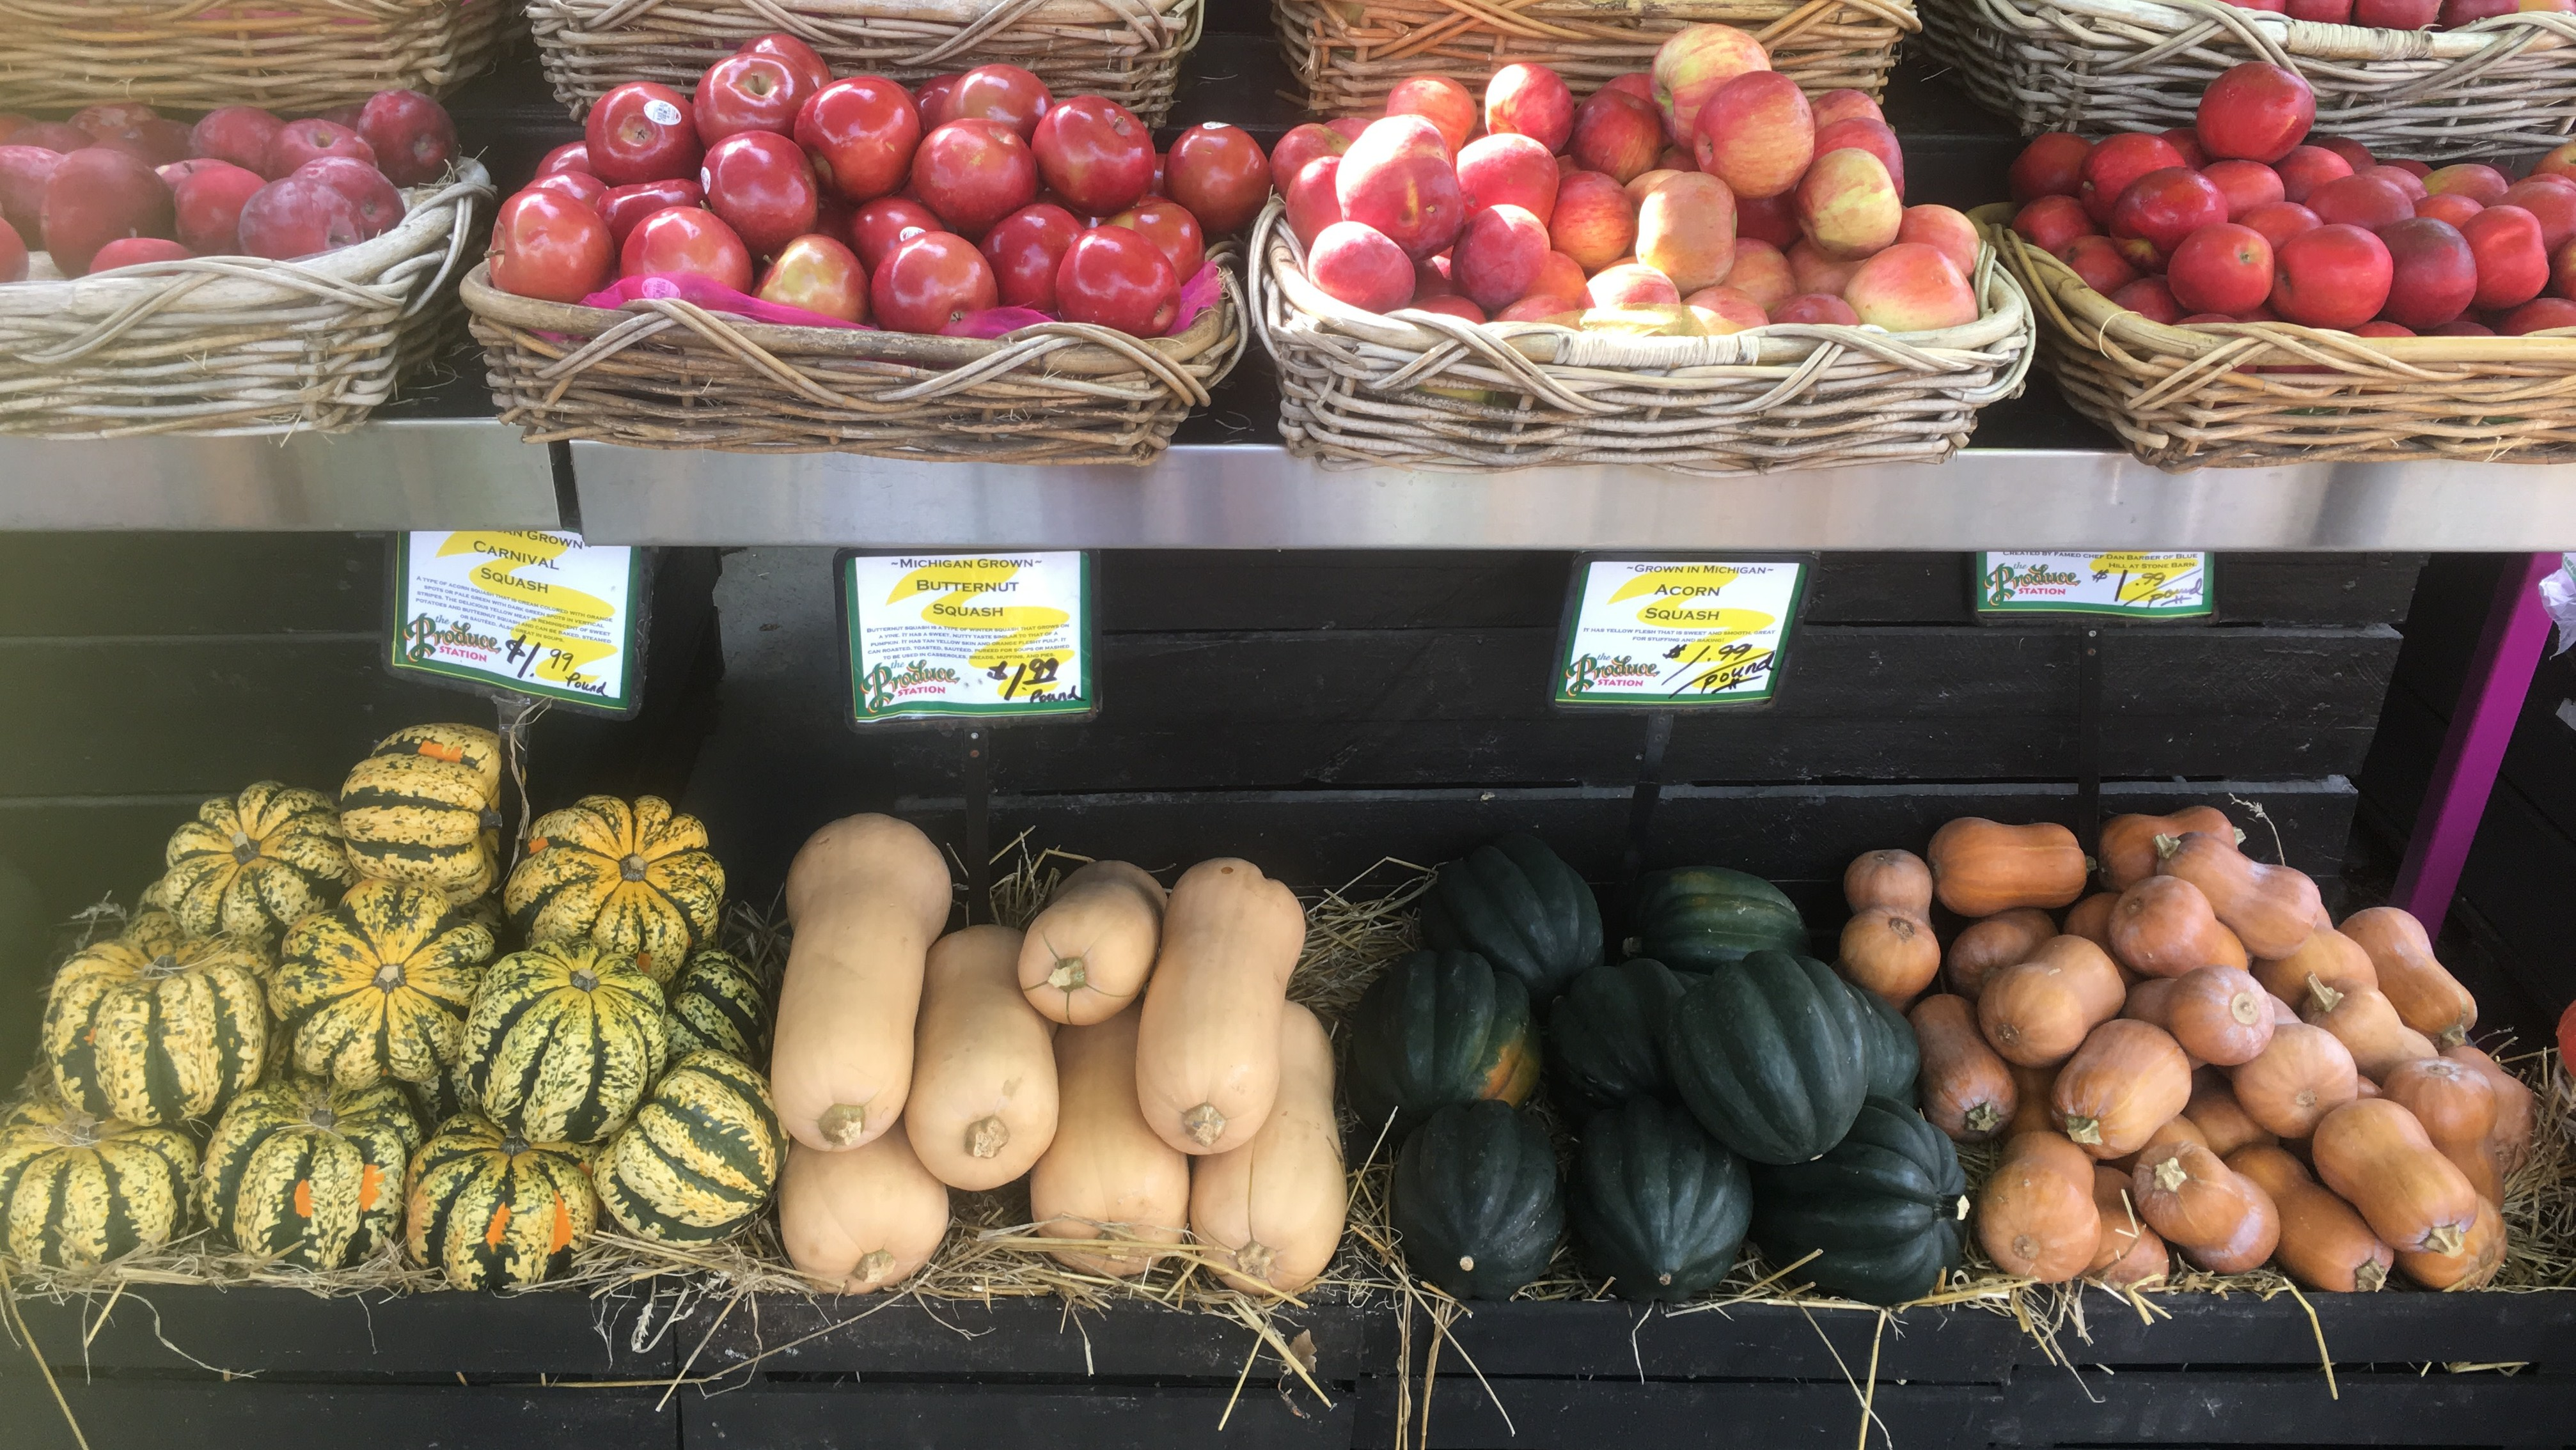 Baskets of produce at a farmers market, including butternut squash